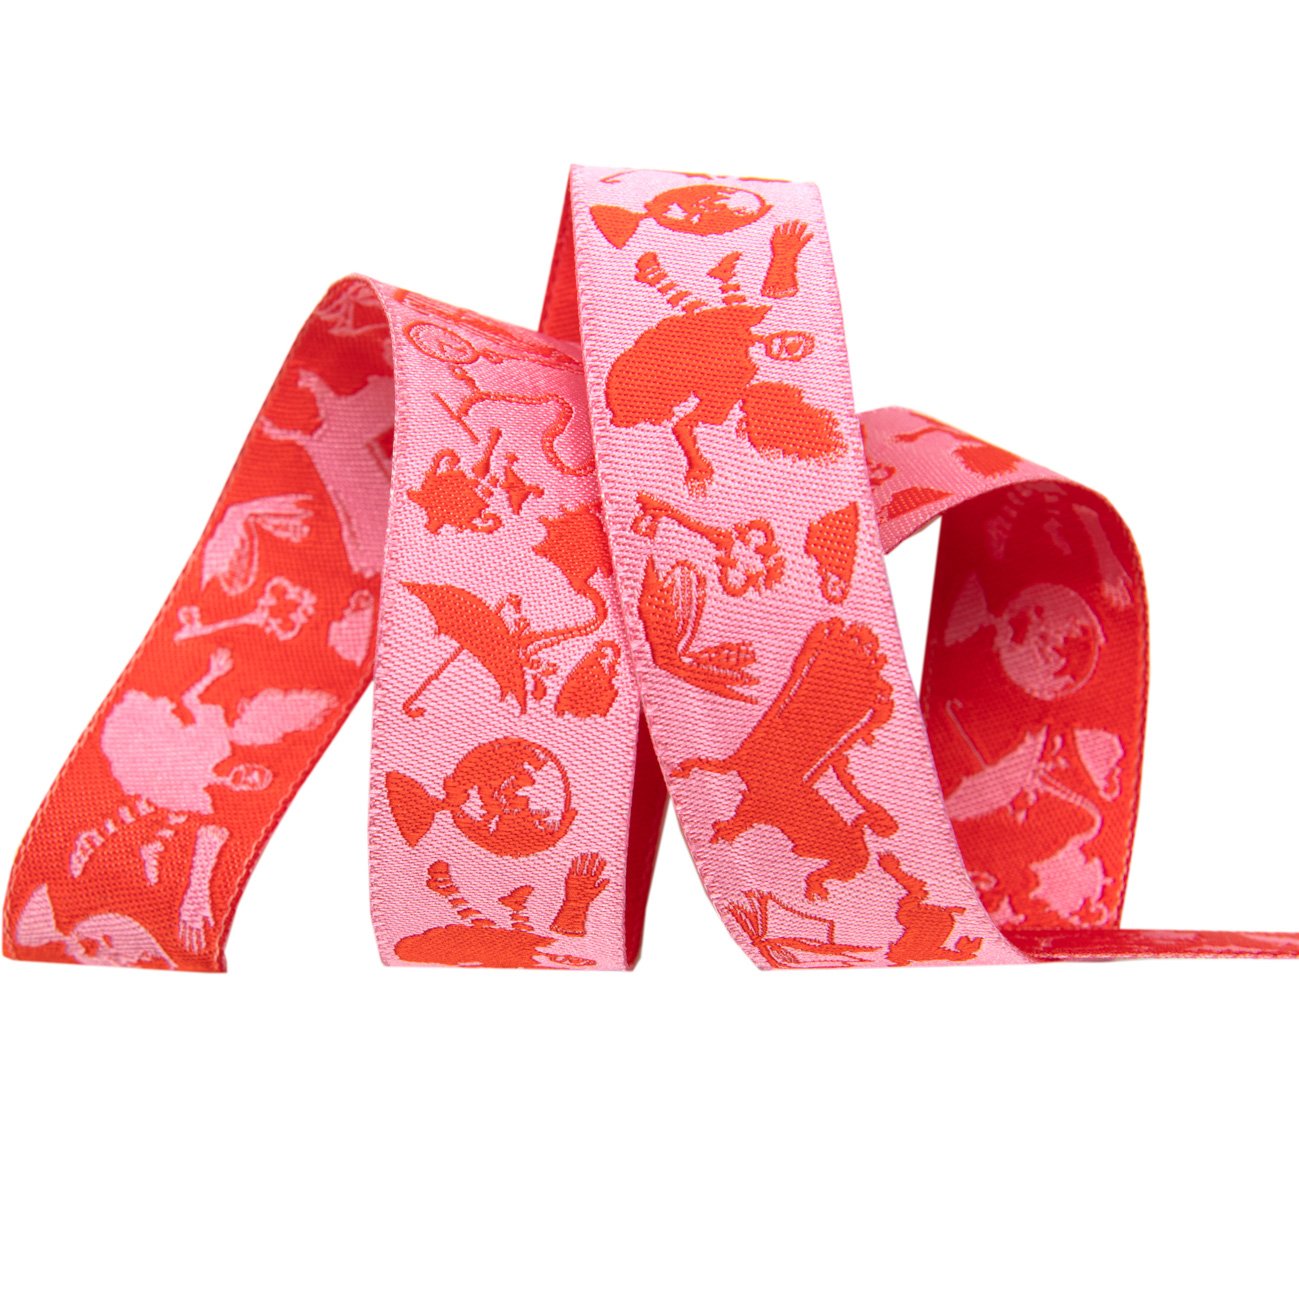 Down the Rabbit Hole Pink-7/8"-Tula Pink Curiouser Ribbon